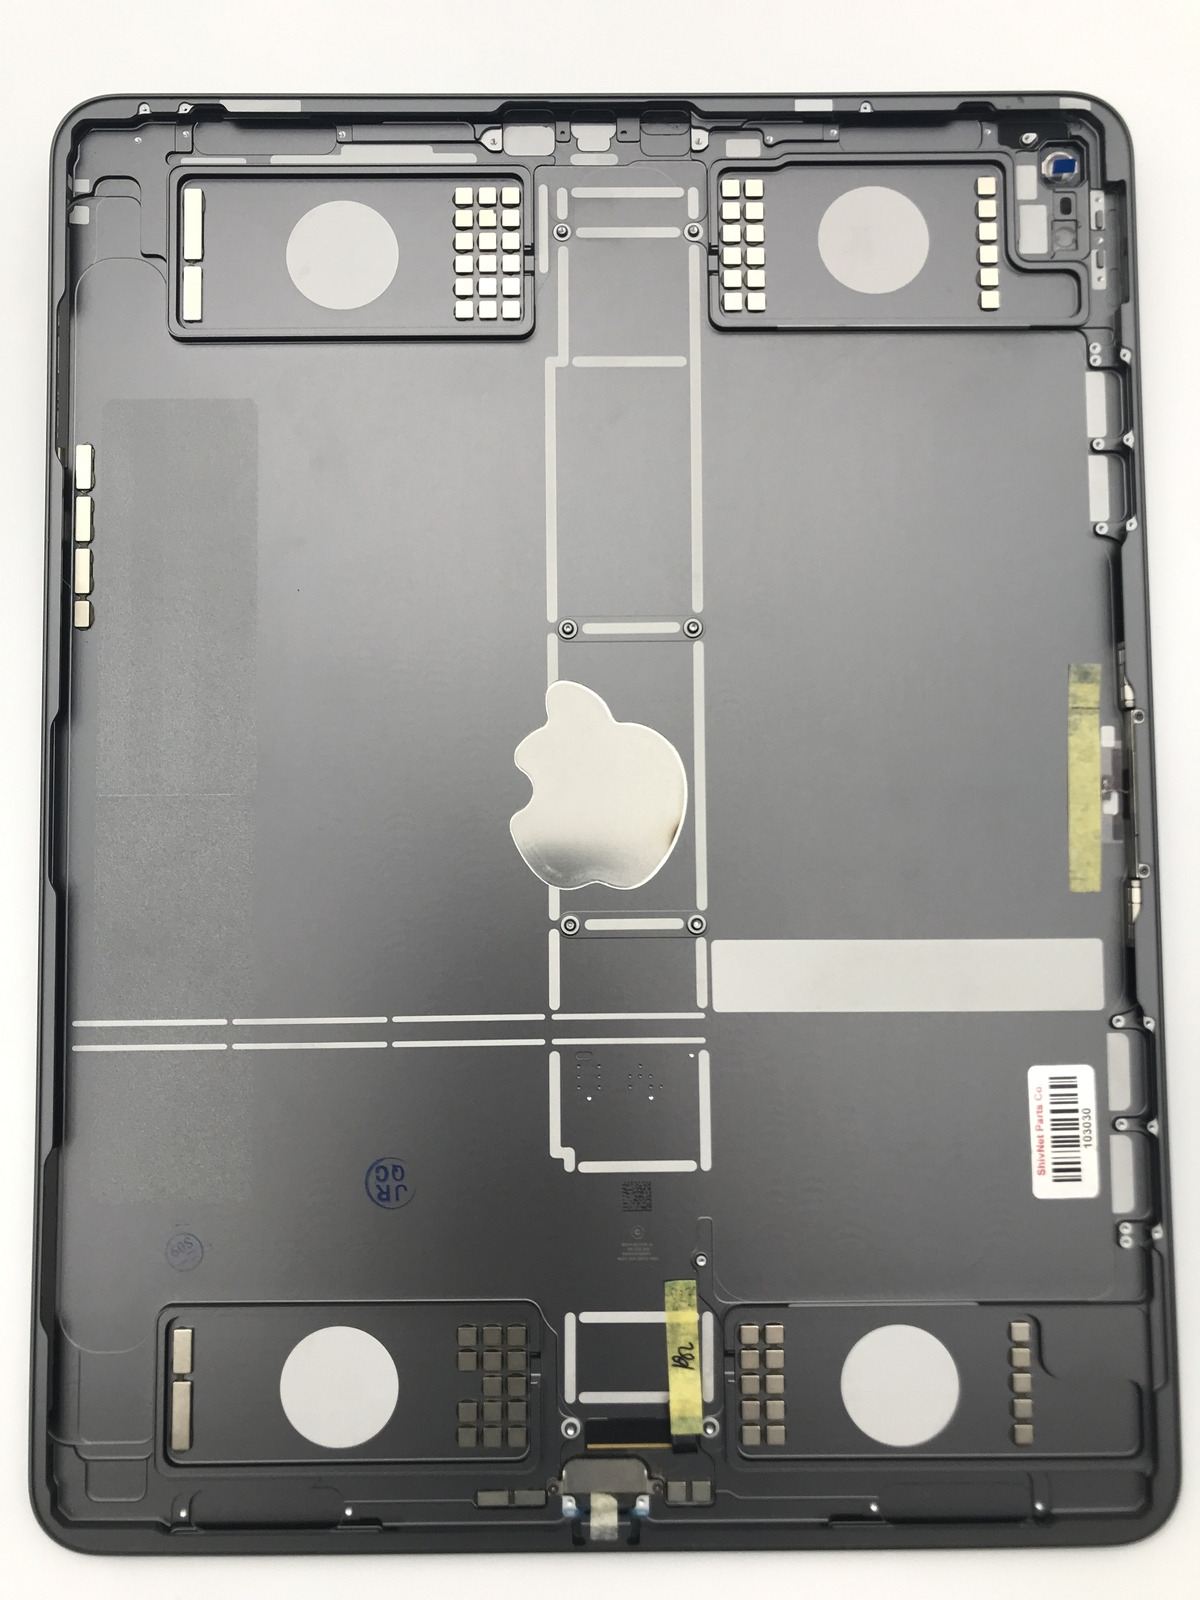 GENUINE BACK COVER for Apple iPad Pro 3rd Gen MTFP2LL/A SPACE GREY